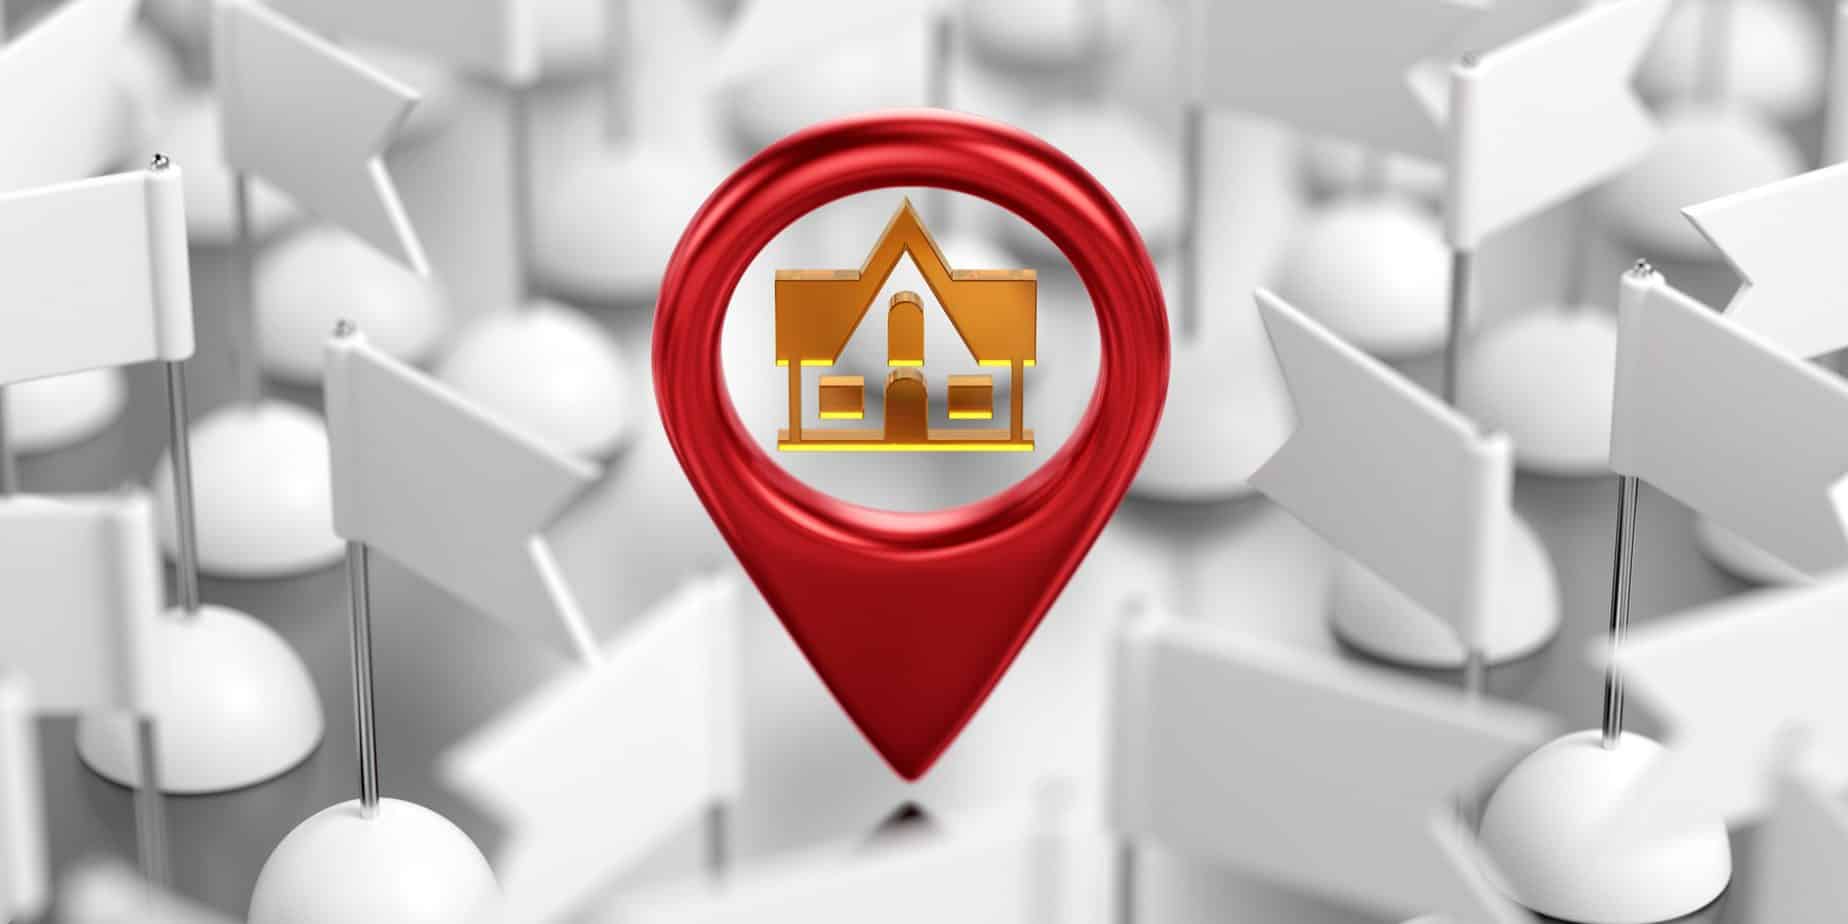 Location, Location, Location: Finding the Perfect Piece of Property for You